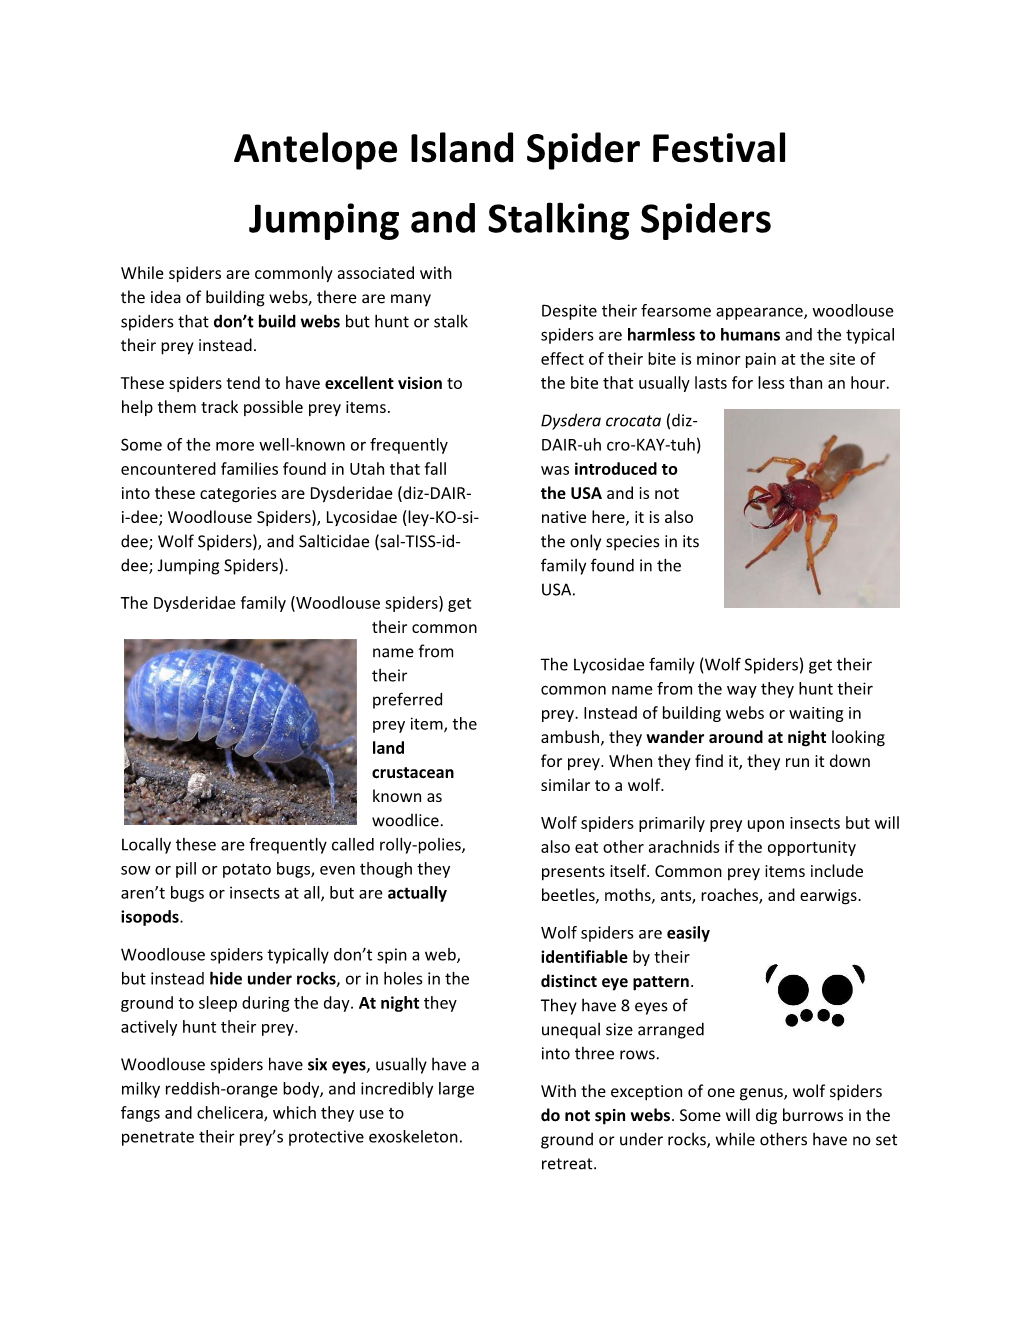 Jumping and Stalking Spiders